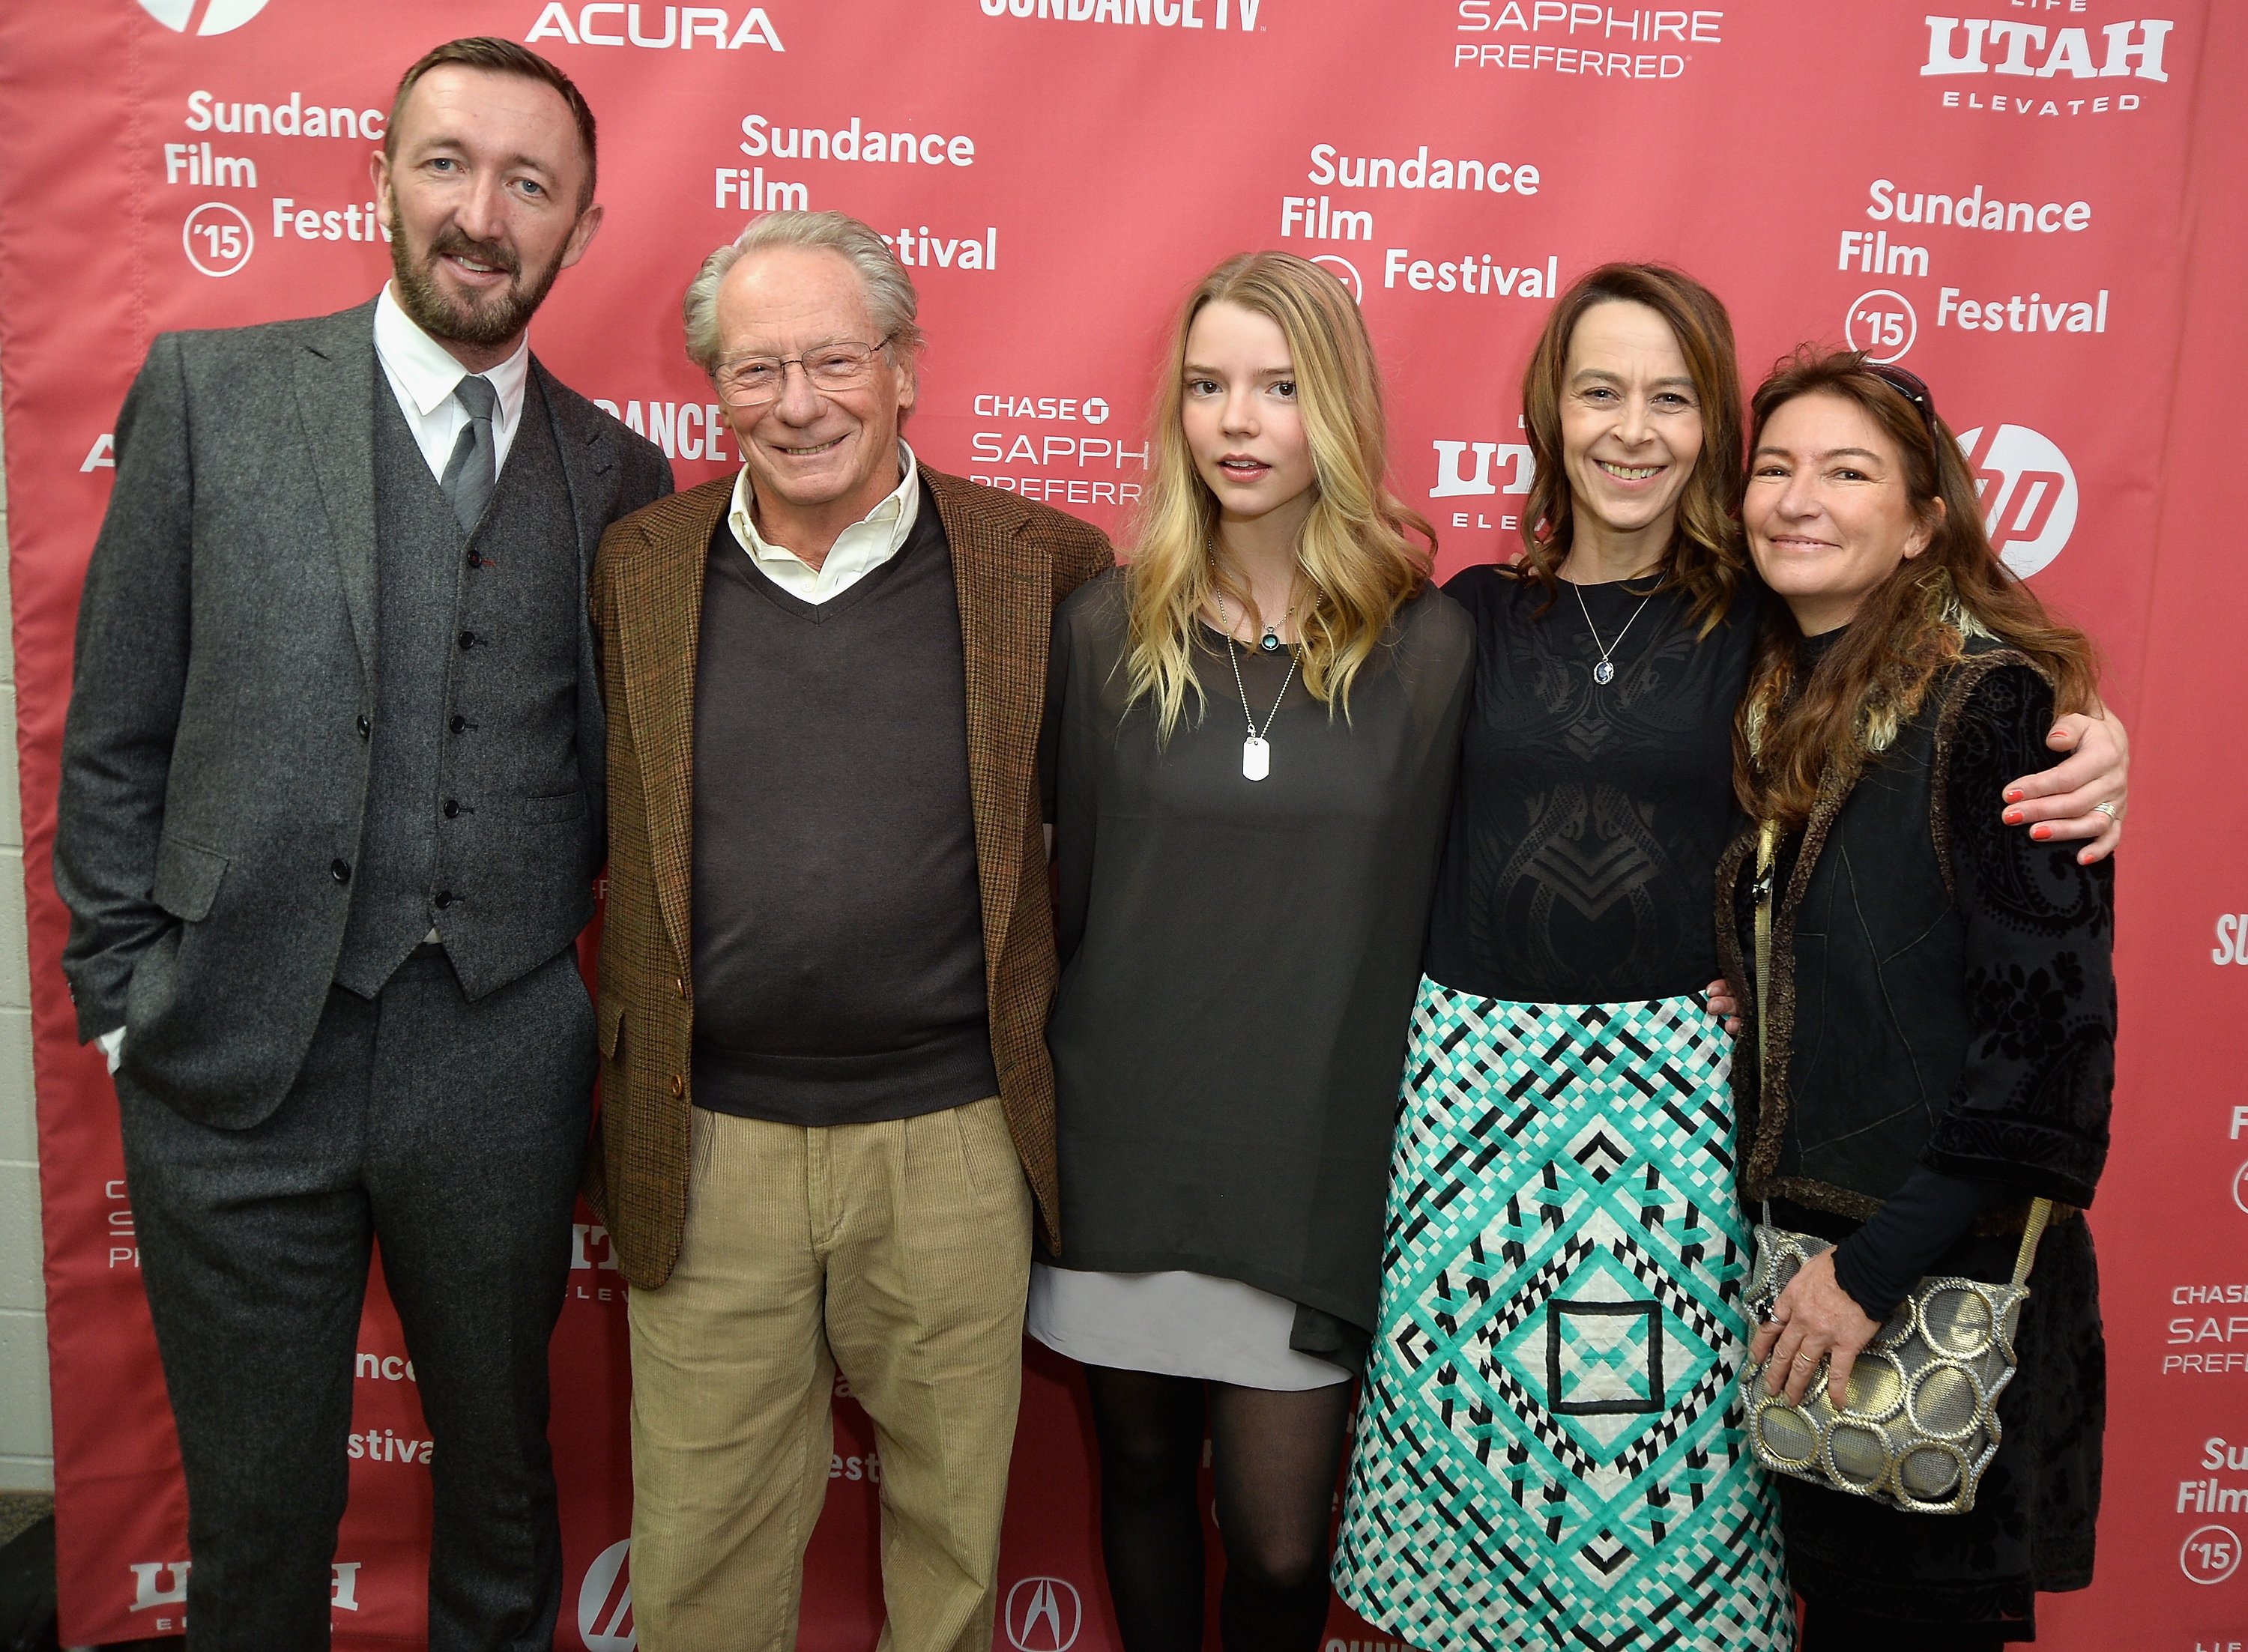 Ralph Ineson, Dennis Taylor, Anya Taylor-Joy, Kate Dickie, and Jennifer Joy at the premiere of "The Witch" in Park City, Utah, on January 27, 2015. | Source: Getty Images